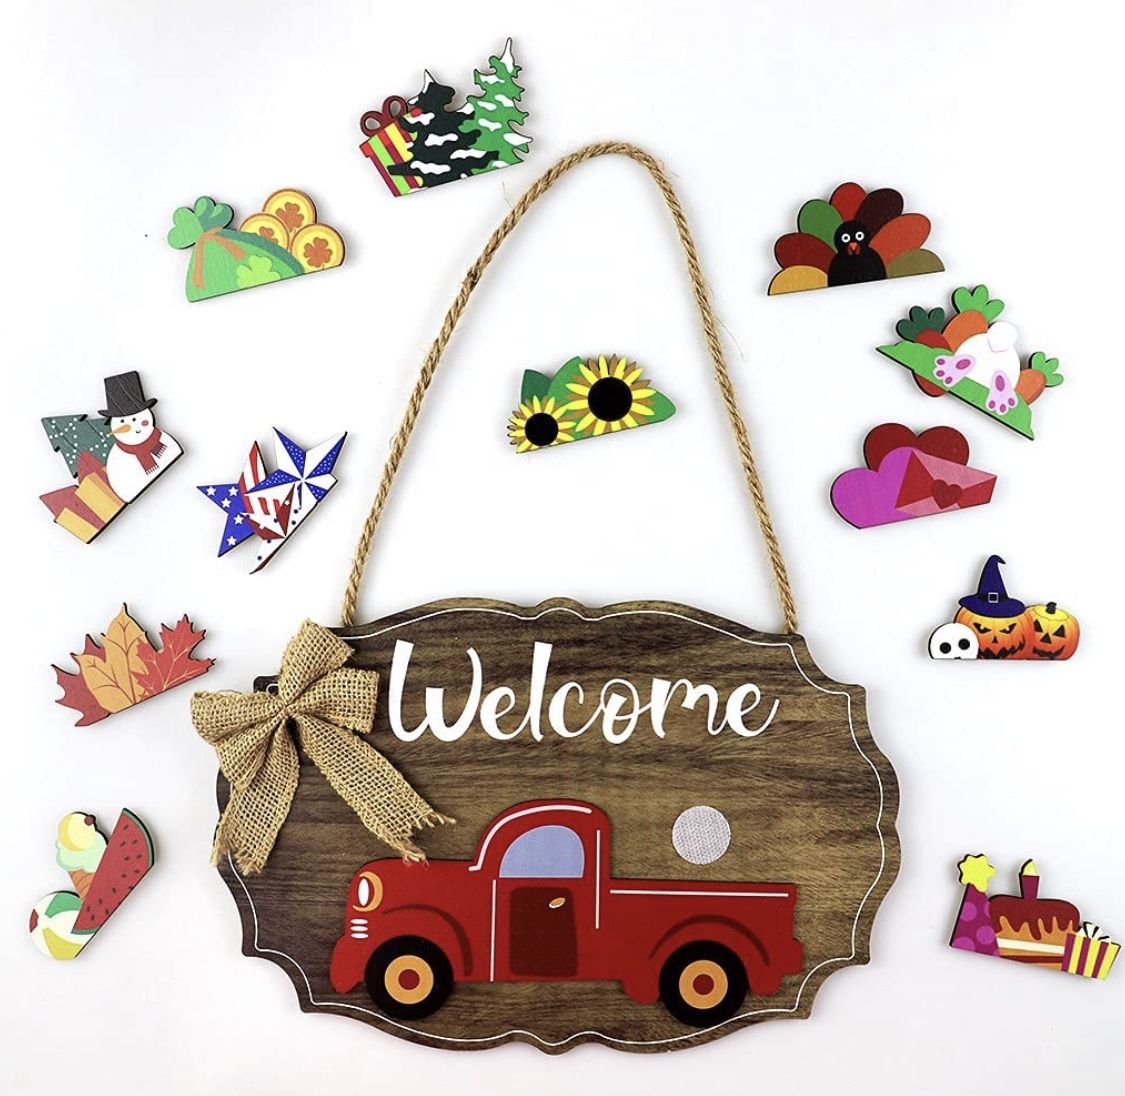 Welcome Sign and Home Decoration. Country red Truck Decoration with 12 Interchangeable Holiday Icons, Suitable for Spring, Easter, Autumn Harvest, Hal